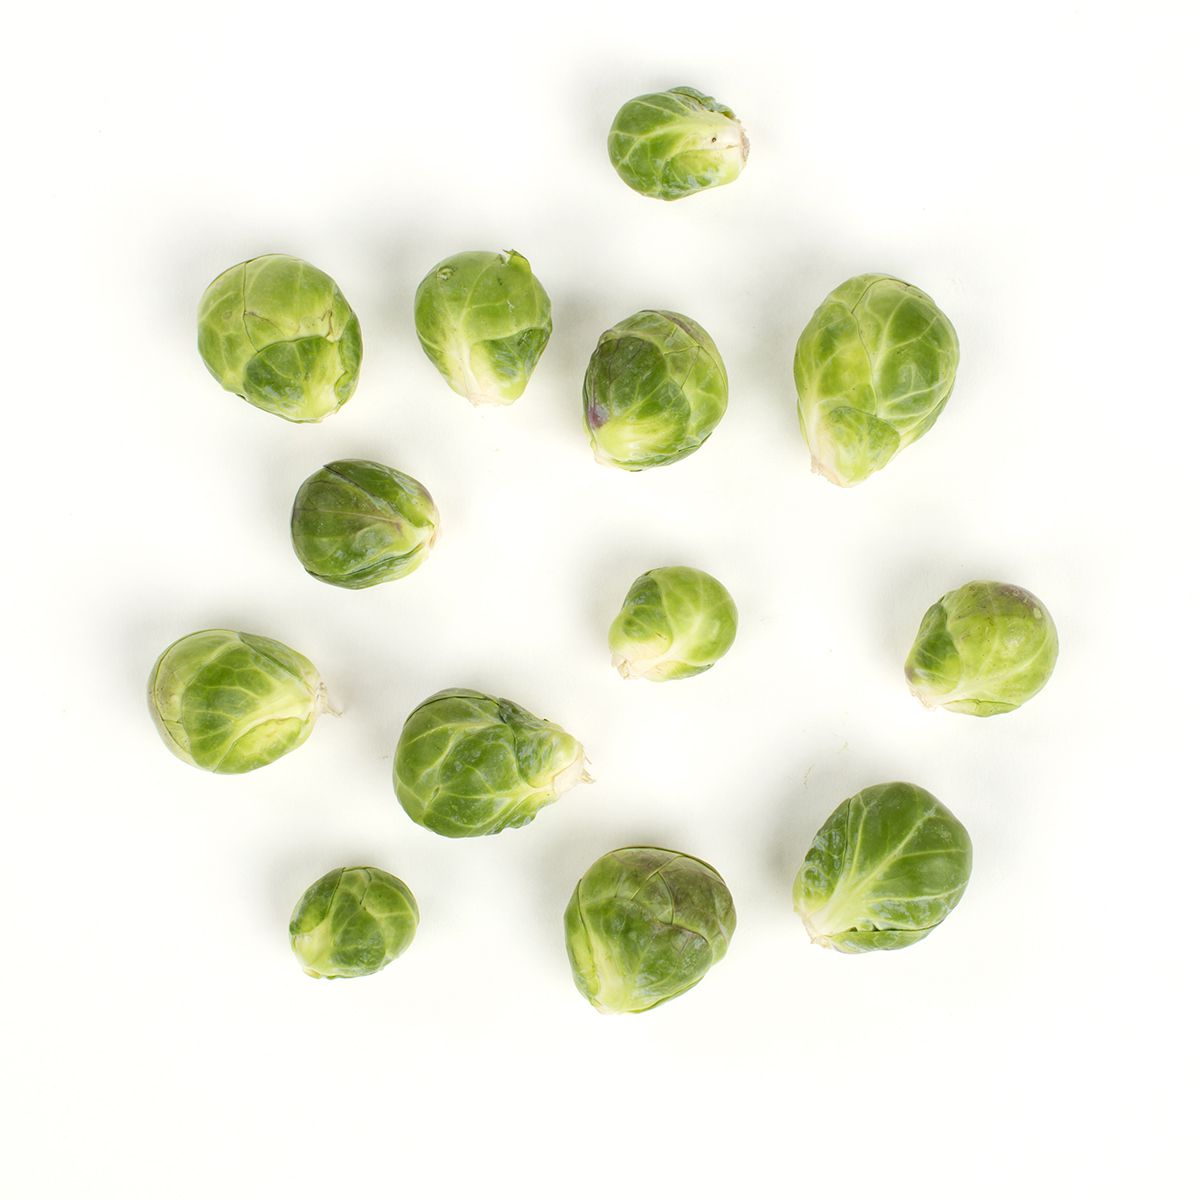 BoxNCase Brussels Sprouts